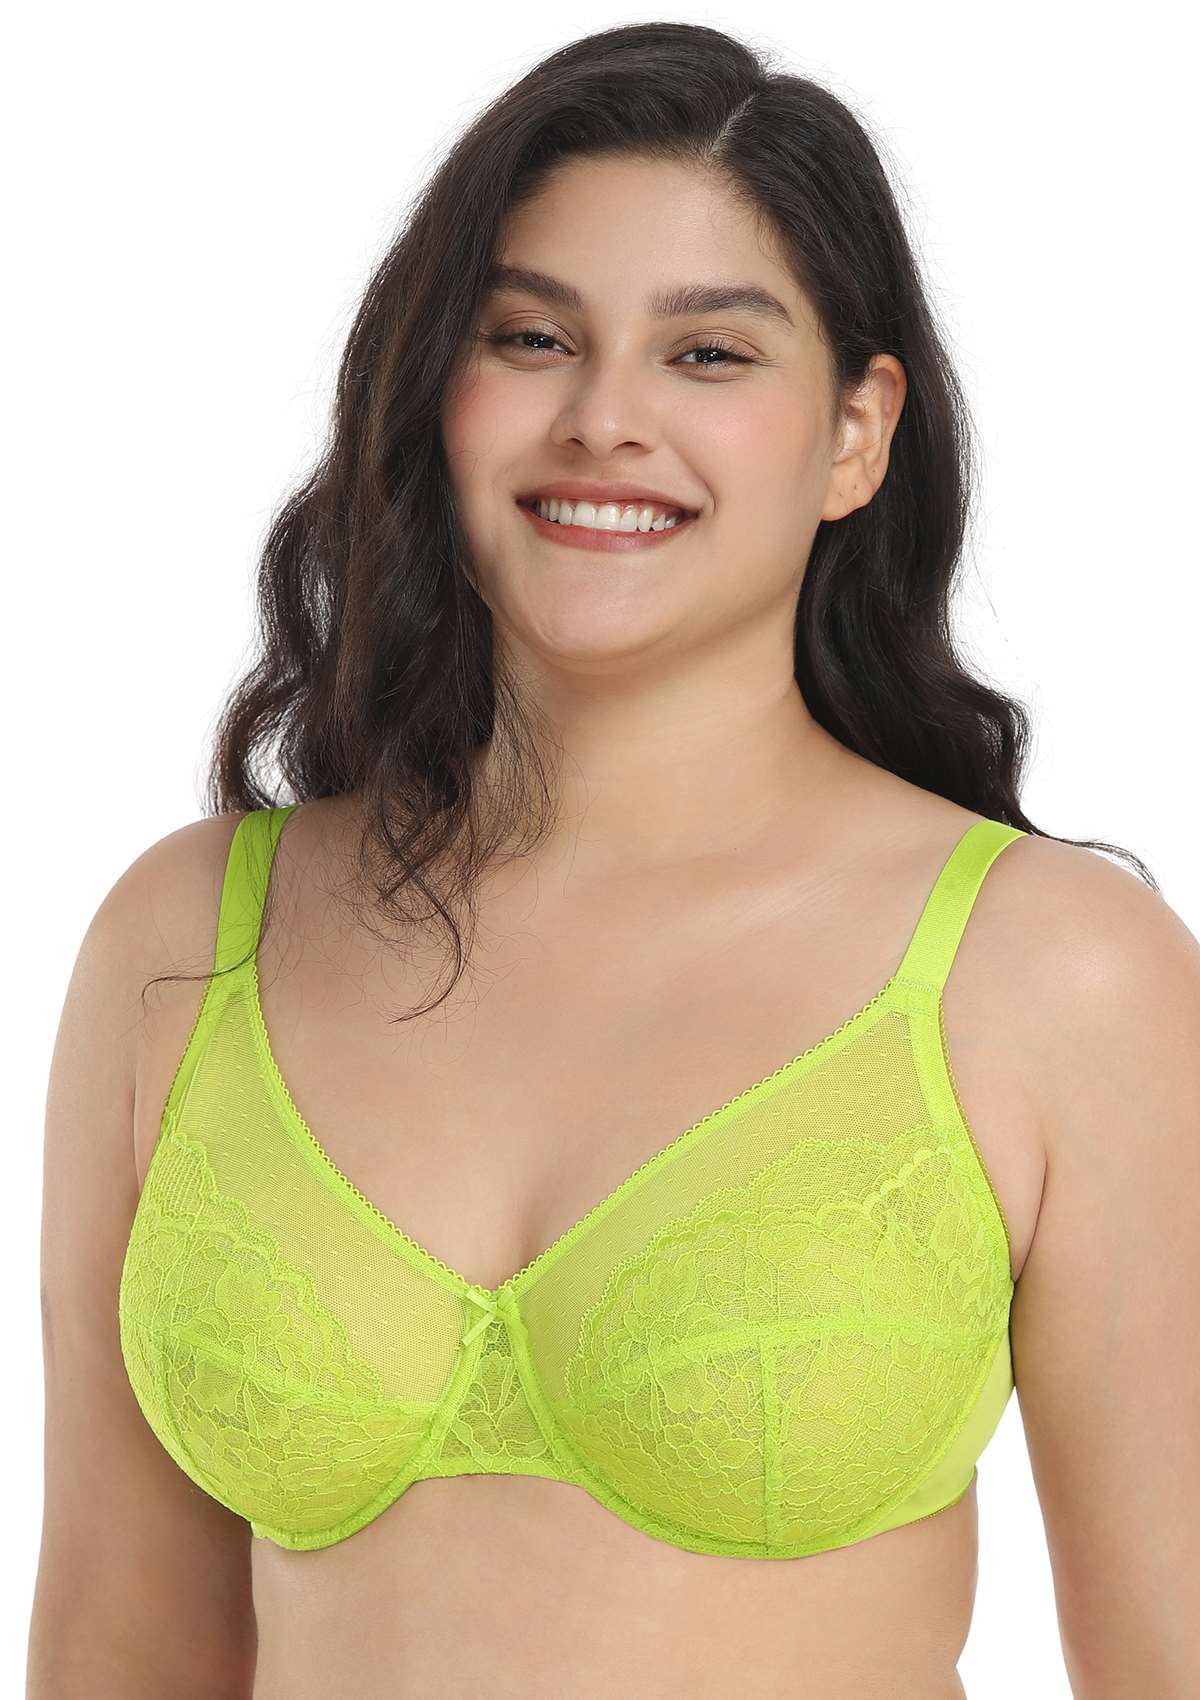 HSIA Enchante Full Cup Minimizing Bra: Supportive Unlined Lace Bra - Lime Green / 42 / DDD/F